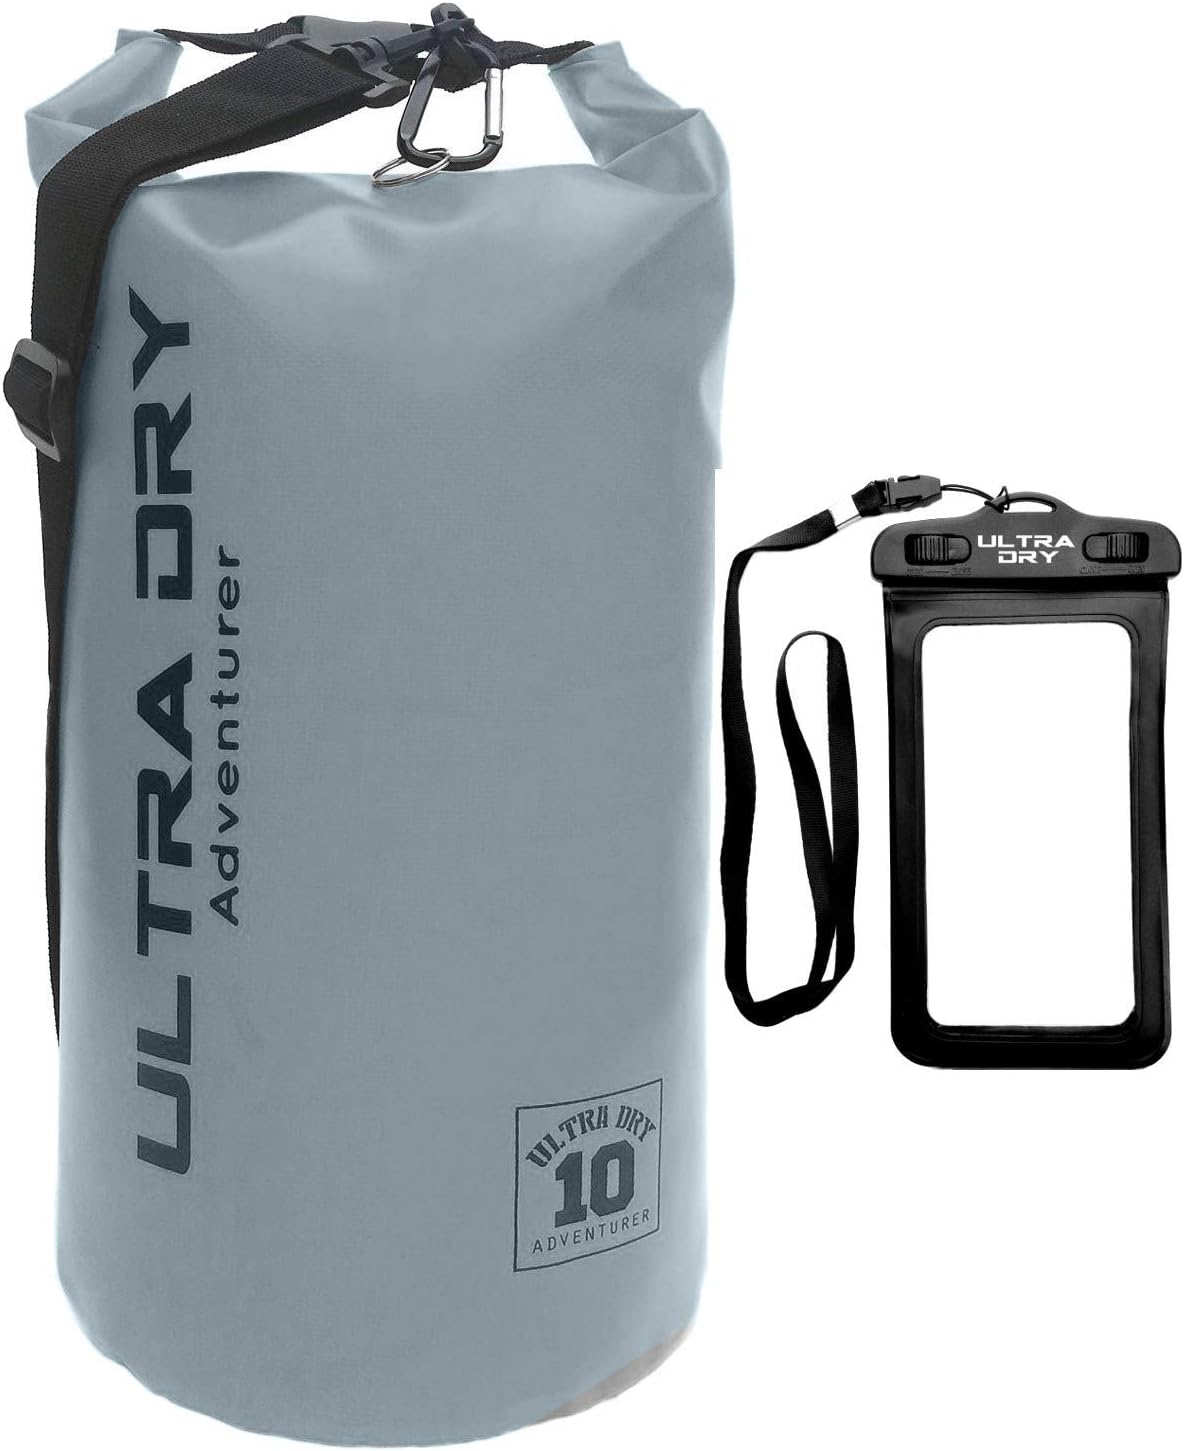 Premium Waterproof Bag, Sack with phone dry bag and long adjustable Shoulder Strap Included, Perfect for Kayaking/Boating/Canoeing/Fishing/Rafting/Swimming/Camping/Snowboarding